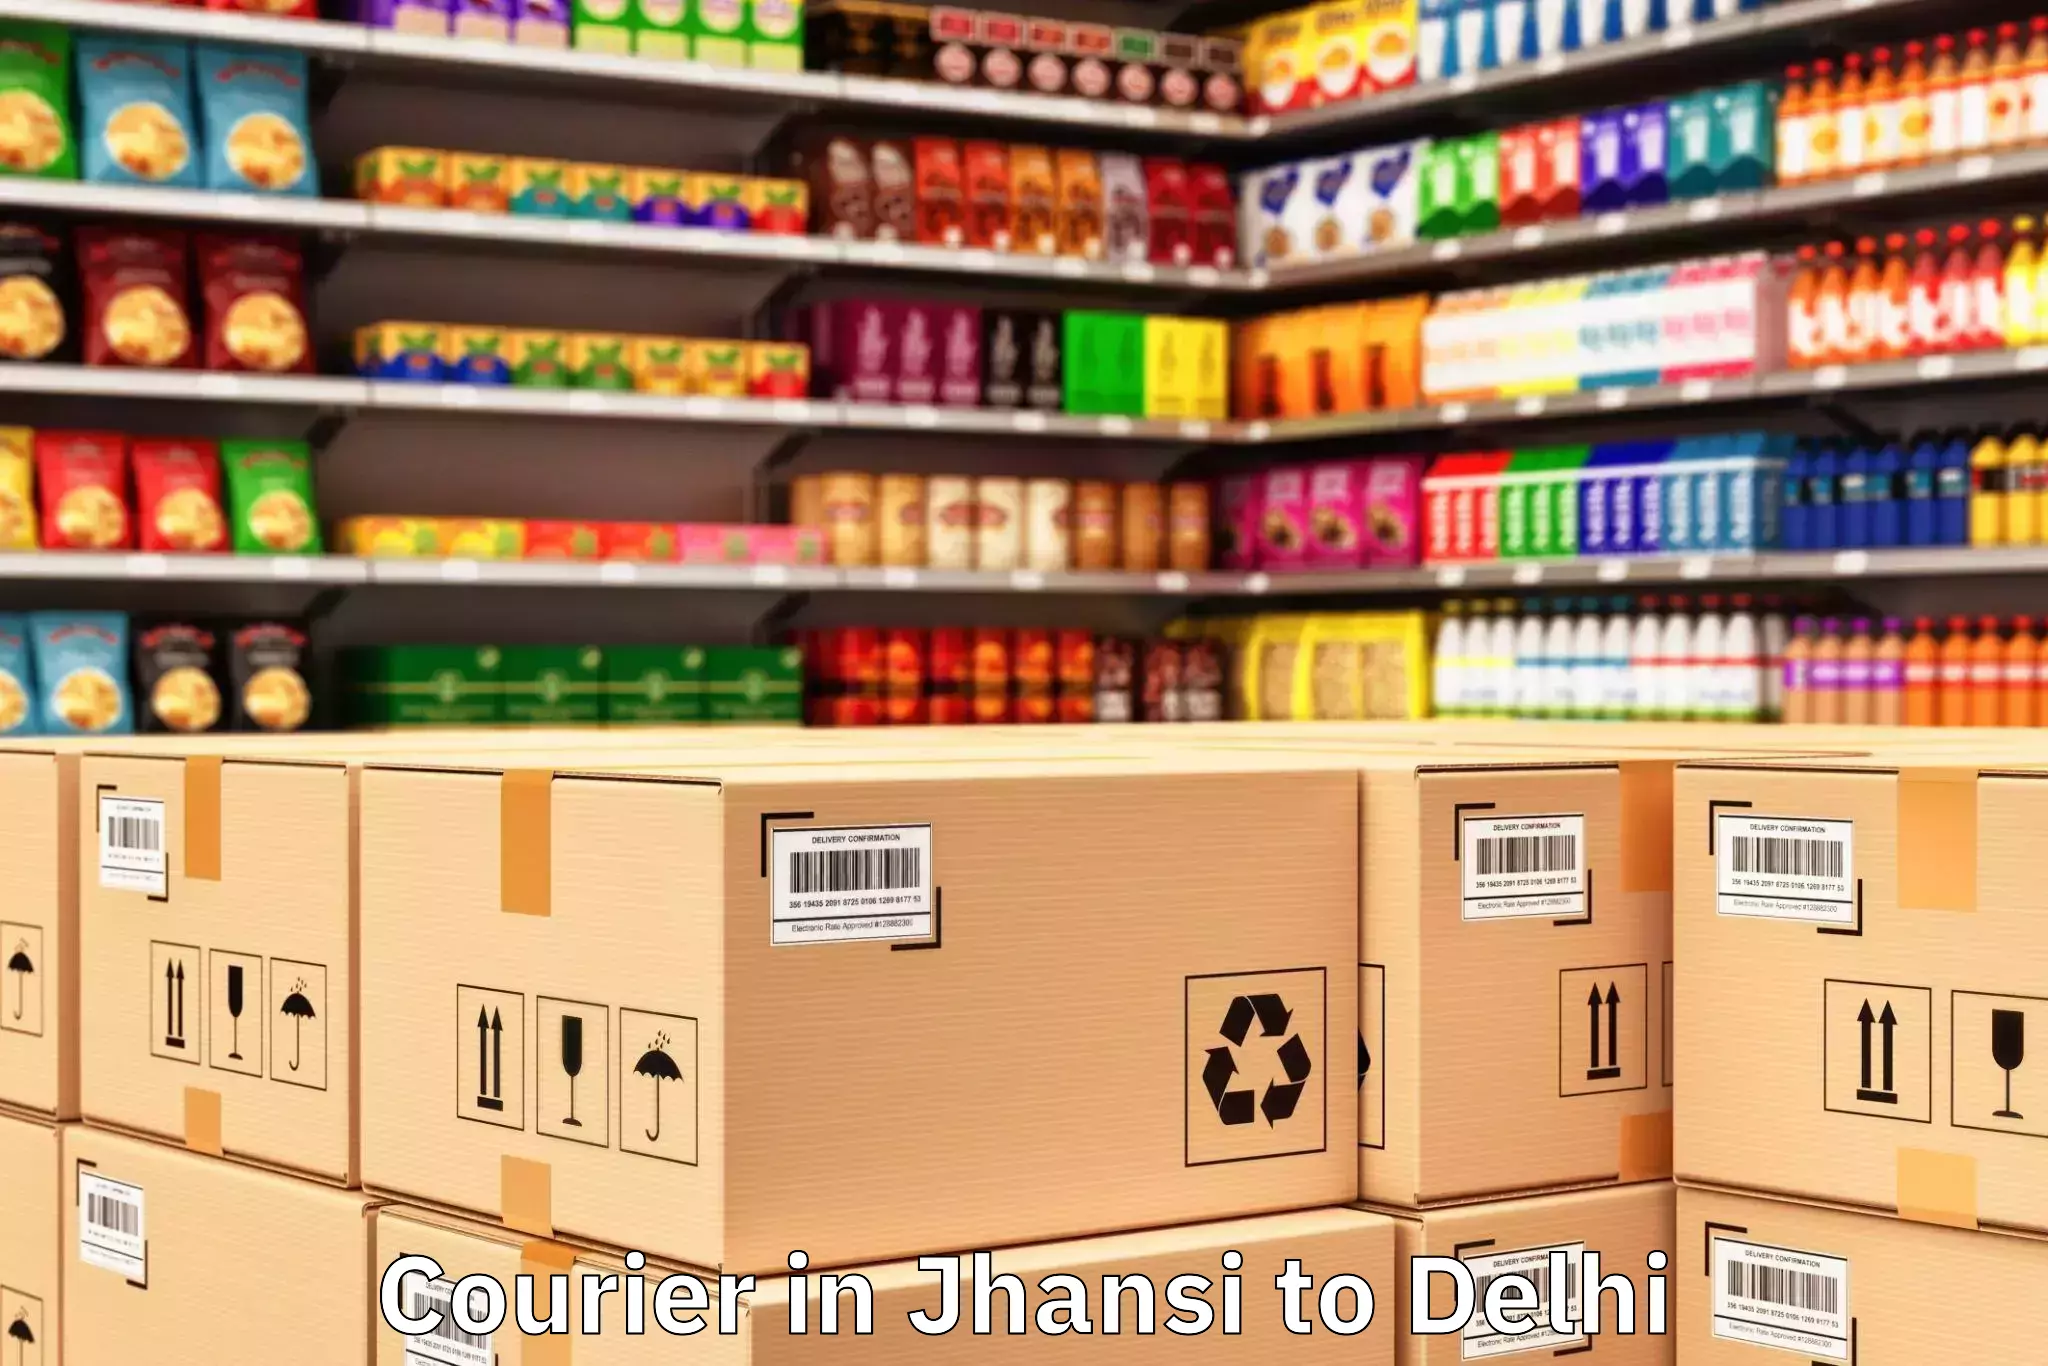 Reliable Jhansi to Unity One Mall Cbd Shahdara Courier